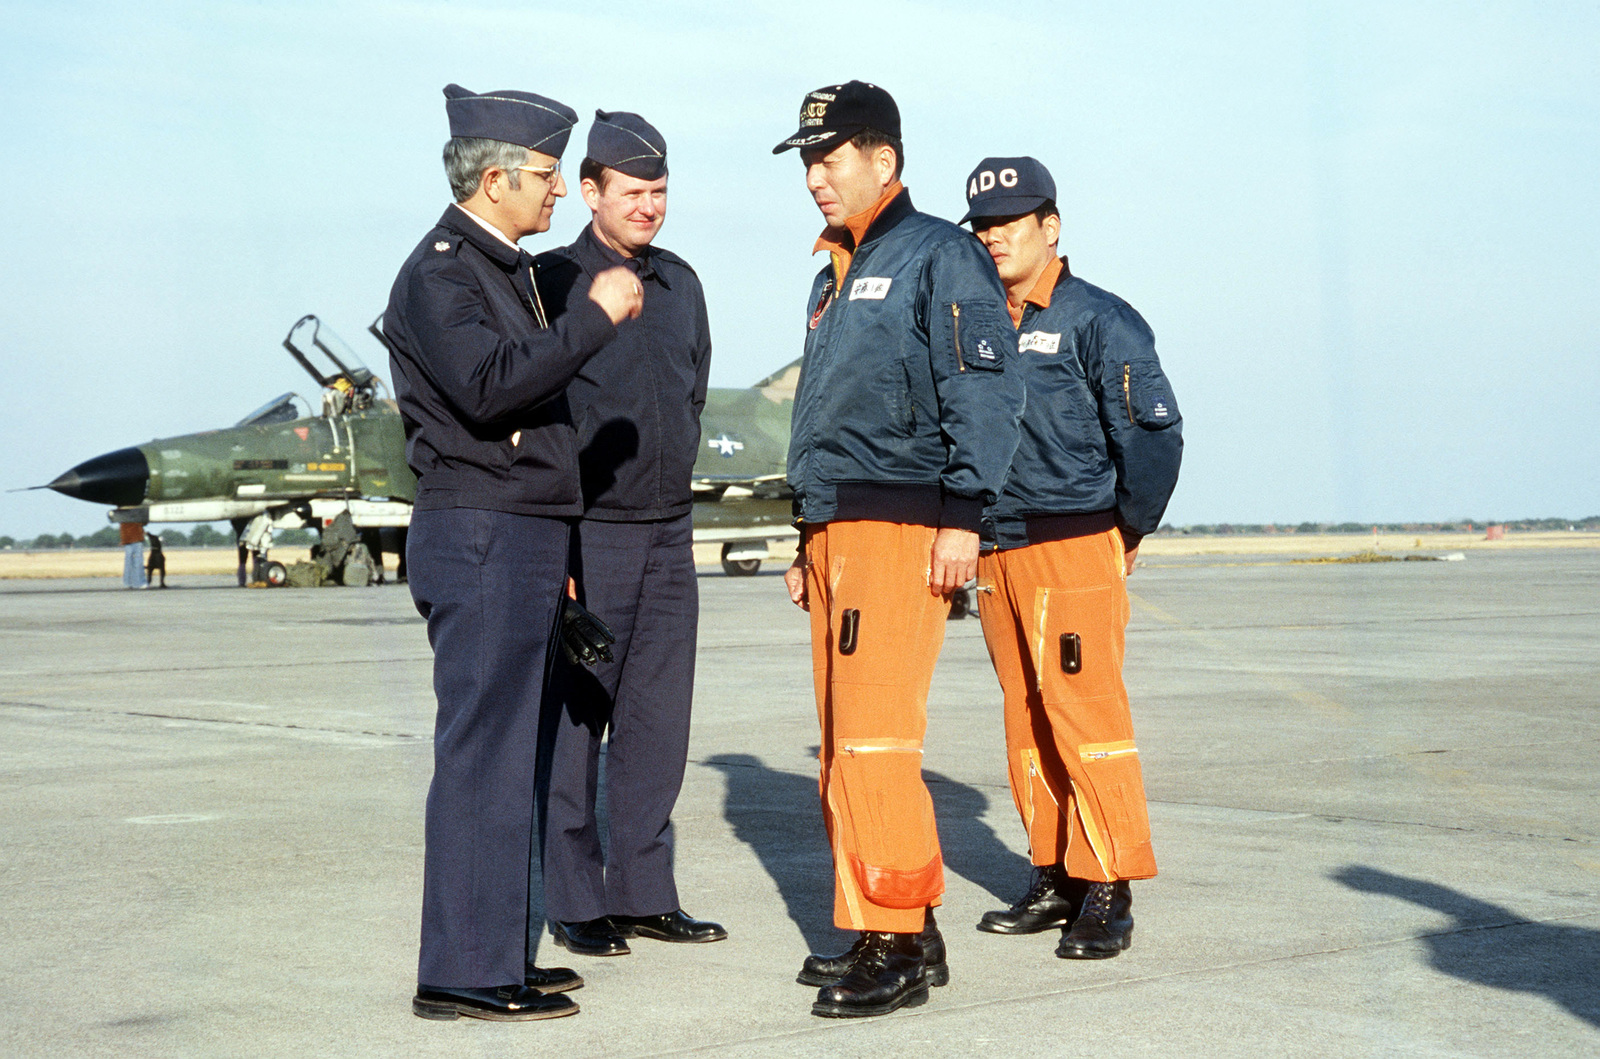 japanese-pilots-and-us-air-force-officers-discuss-operations-on-the-flight-20b72c-1600.jpg